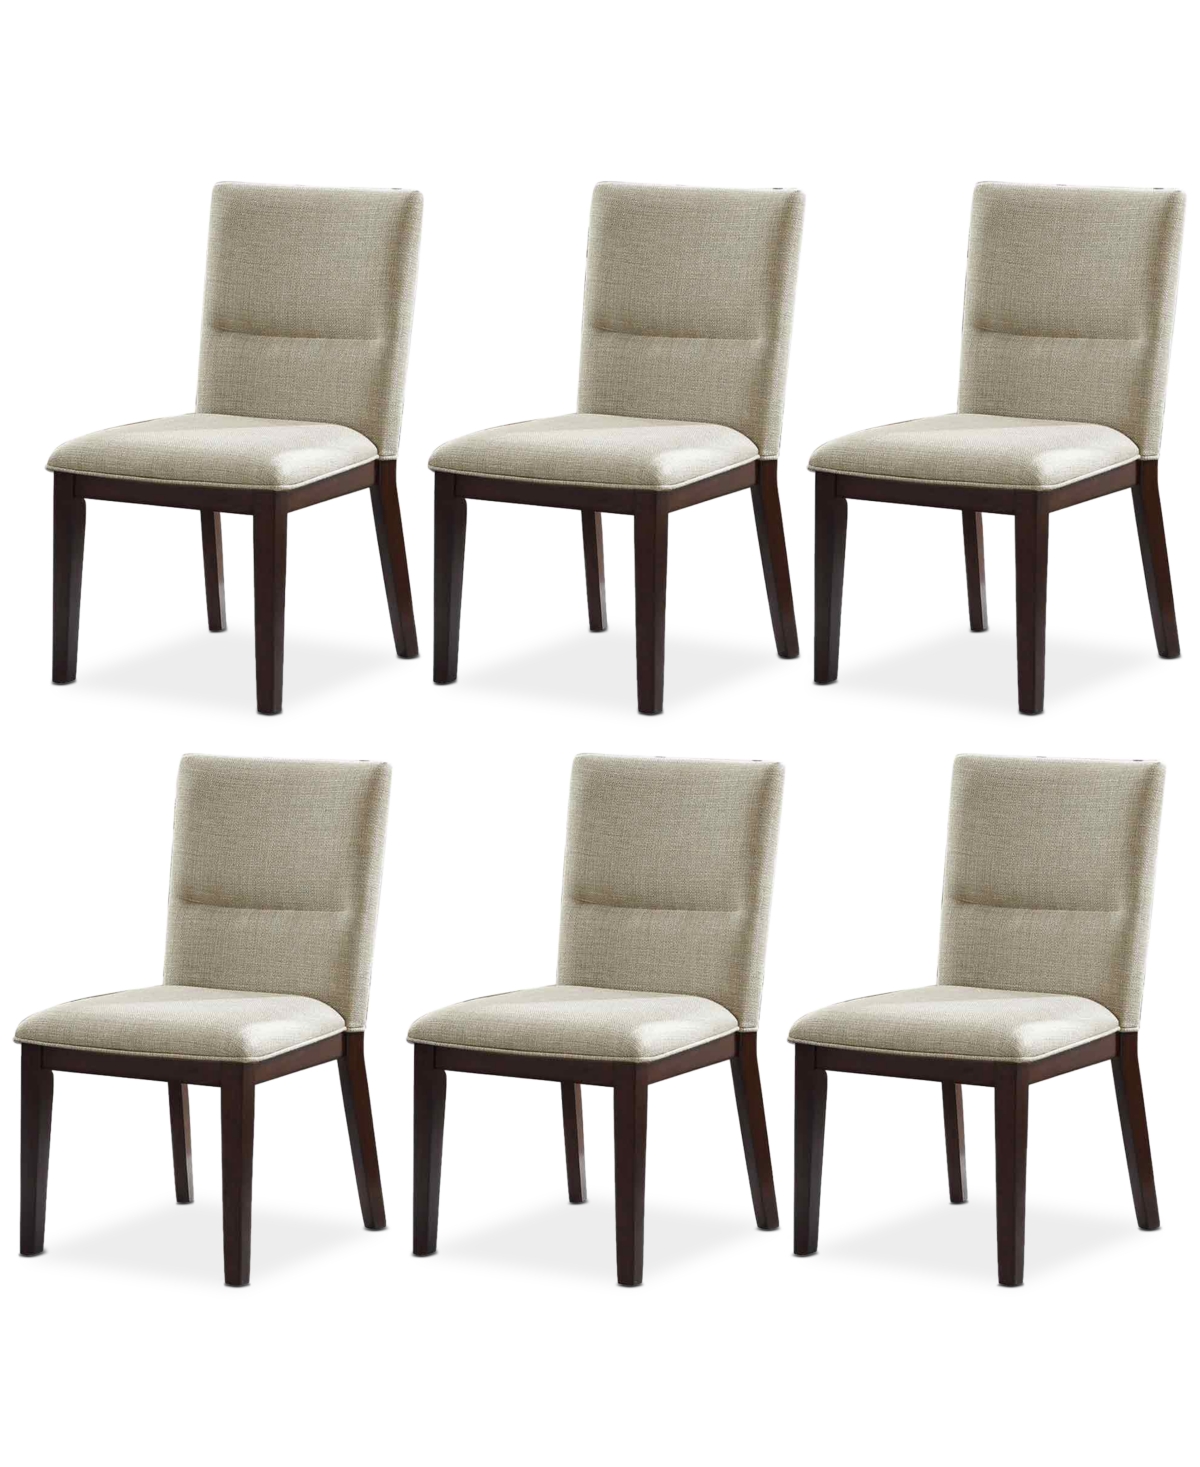 Furniture Amy Grey Dining Chair, 6-pc. Set (6 Side Chairs)